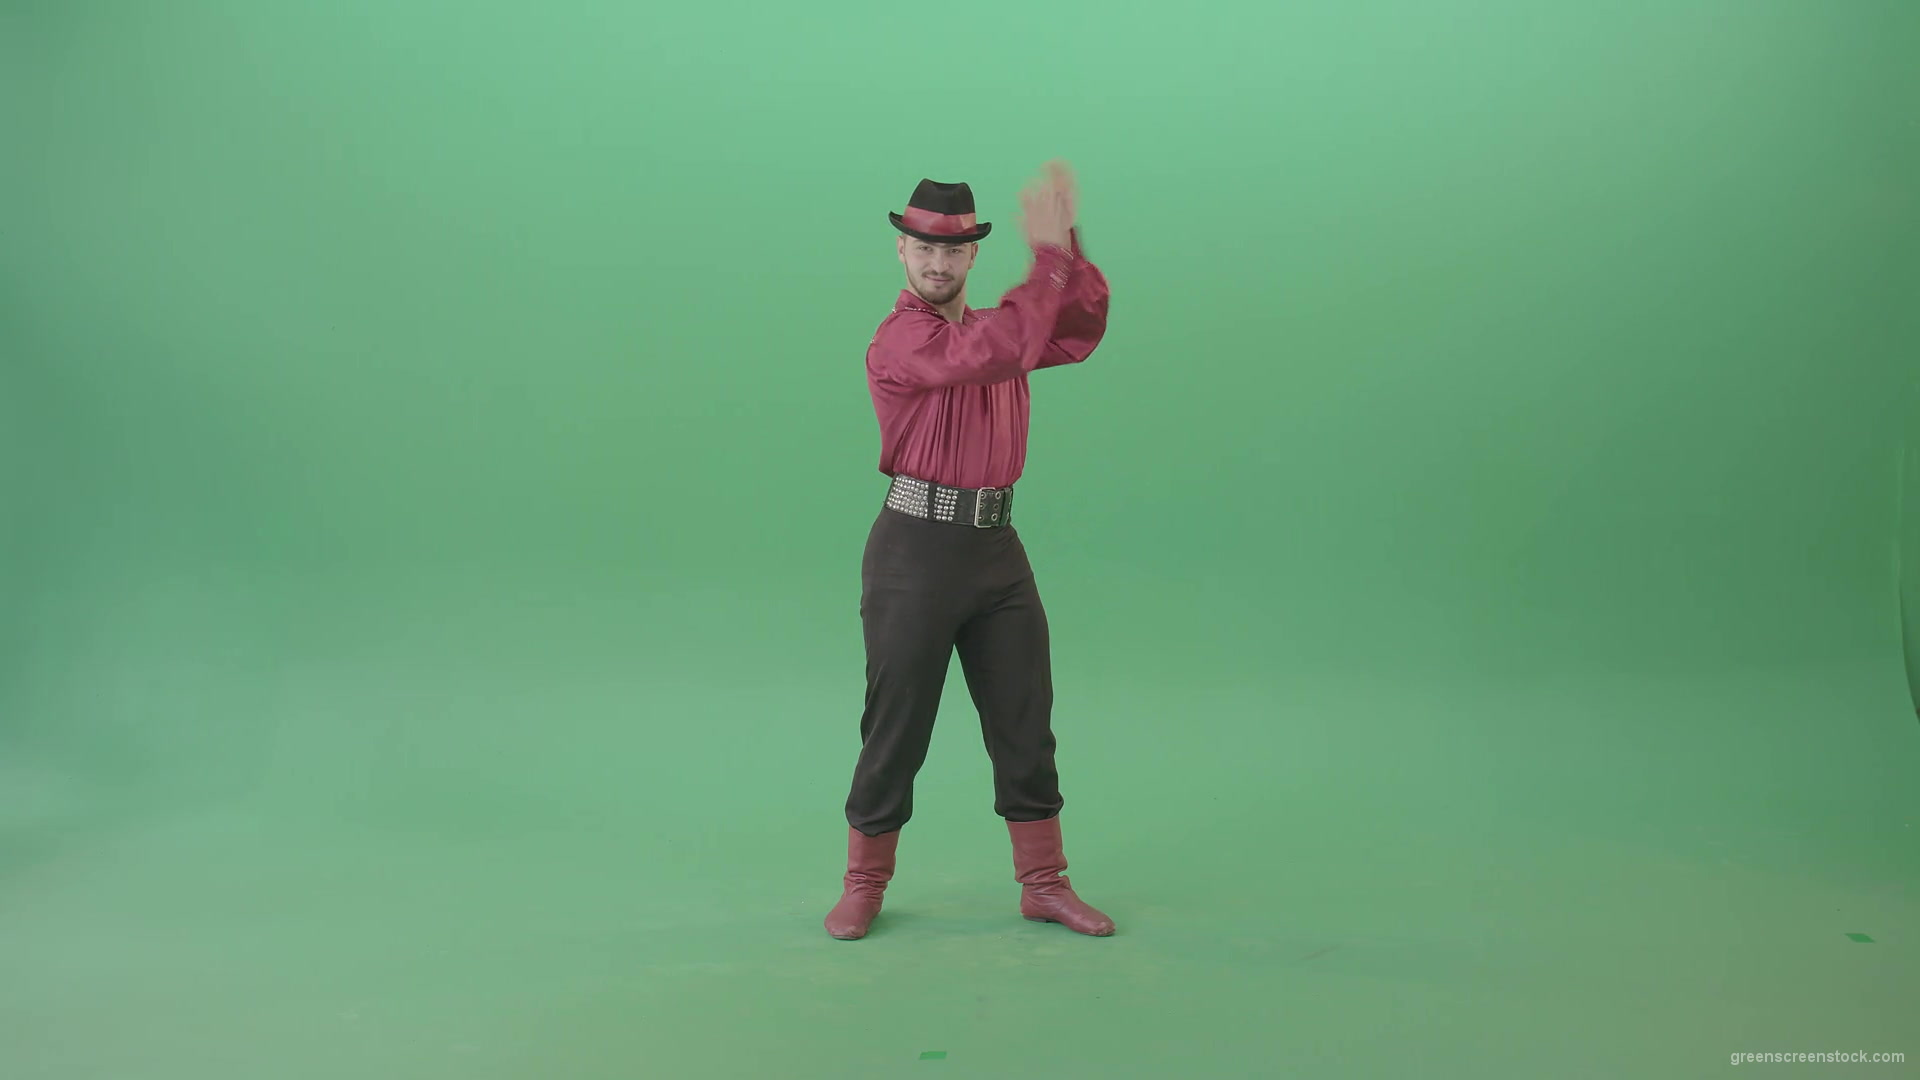 Modovian-Balkan-Gipsy-man-clapping-hands-isolalated-on-green-screen-4K-Video-Footage-1920_005 Green Screen Stock